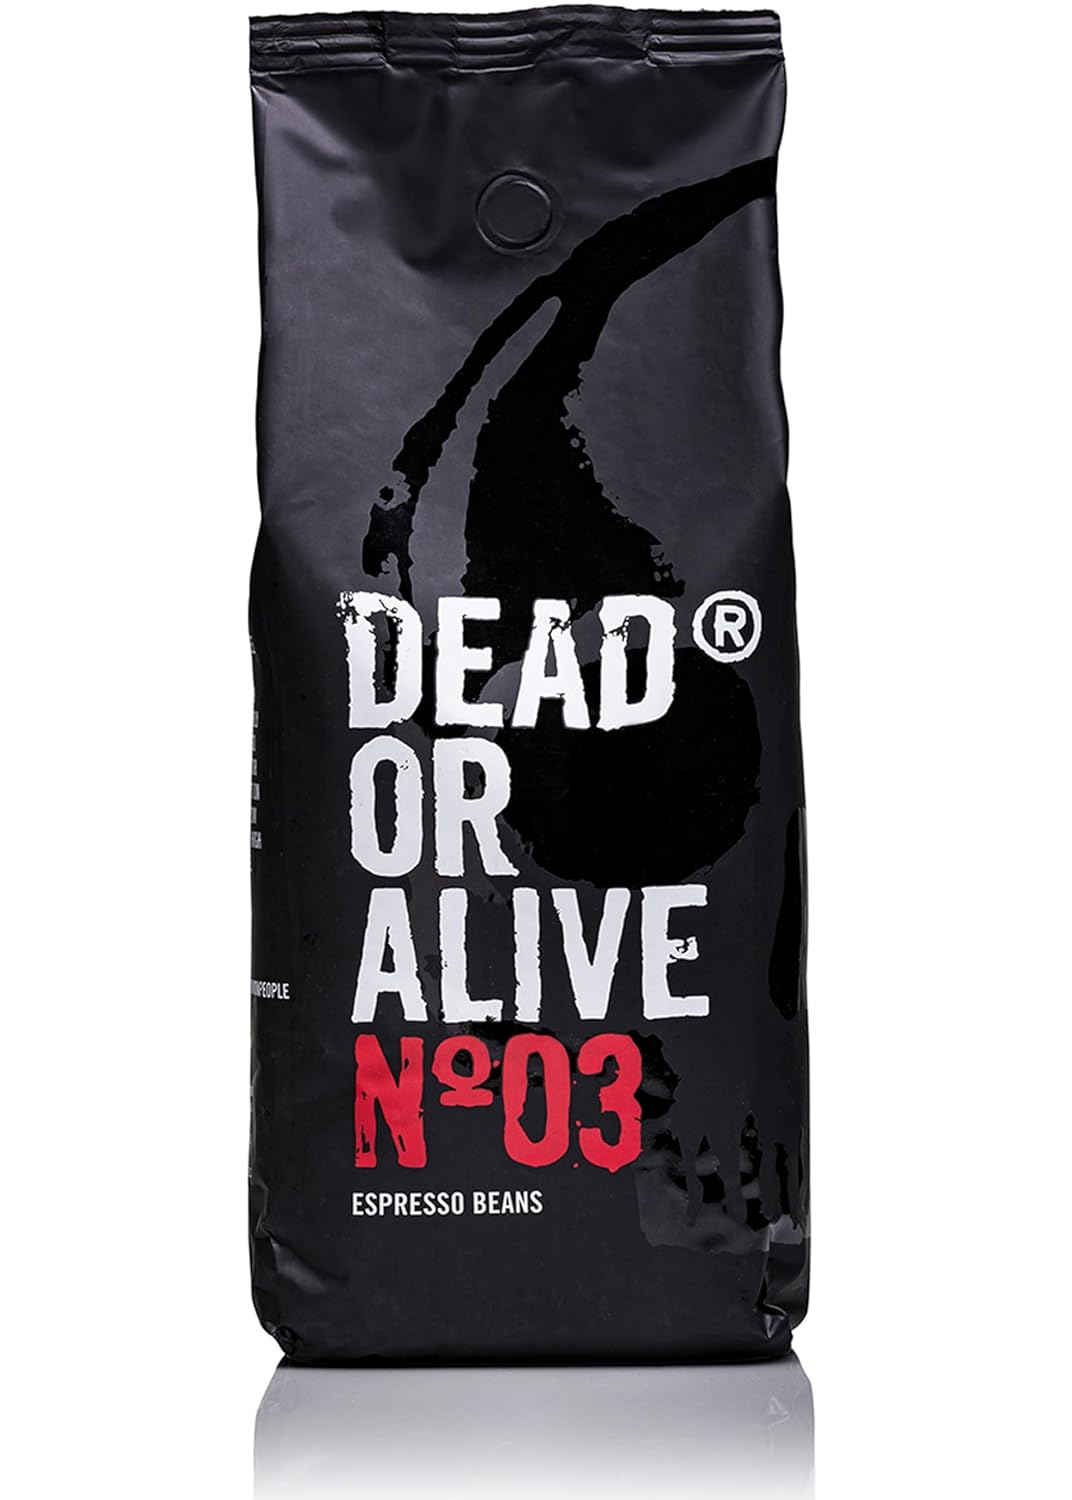 Dead or alive espresso No3 - Strong espresso beans 500g - 100% robusta - coffee beans for fully automatic coffee machine and espresso machine - whole beans with lots of caffeine from Italy - Coffee Beans